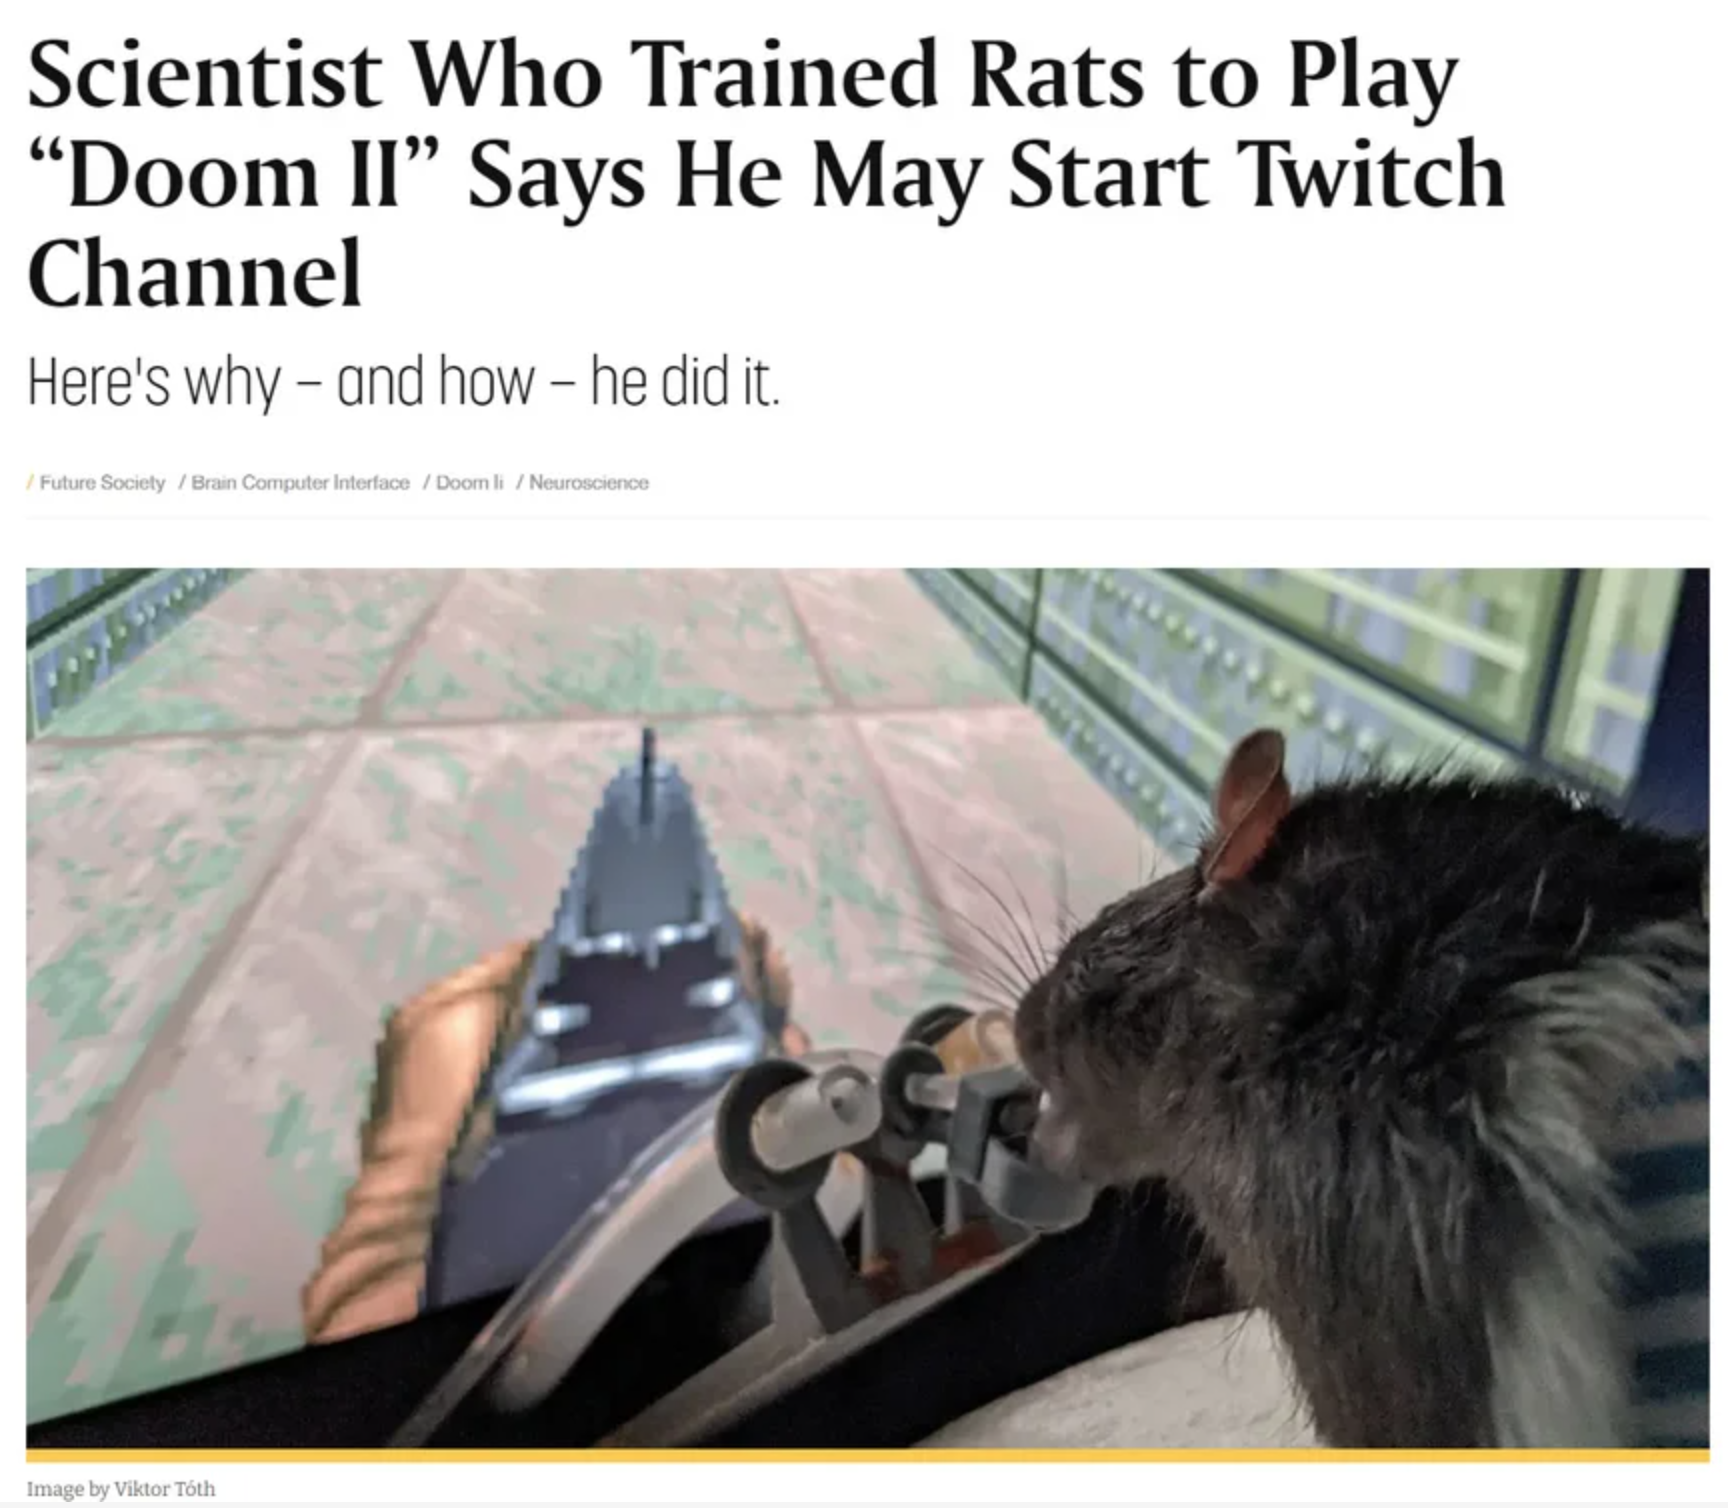 funny gaming memes - quotes - Scientist Who Trained Rats to Play Doom Ii Says He May Start Twitch Channel Here's why and how he did it. Plan Society in Computer alios On Home Ver